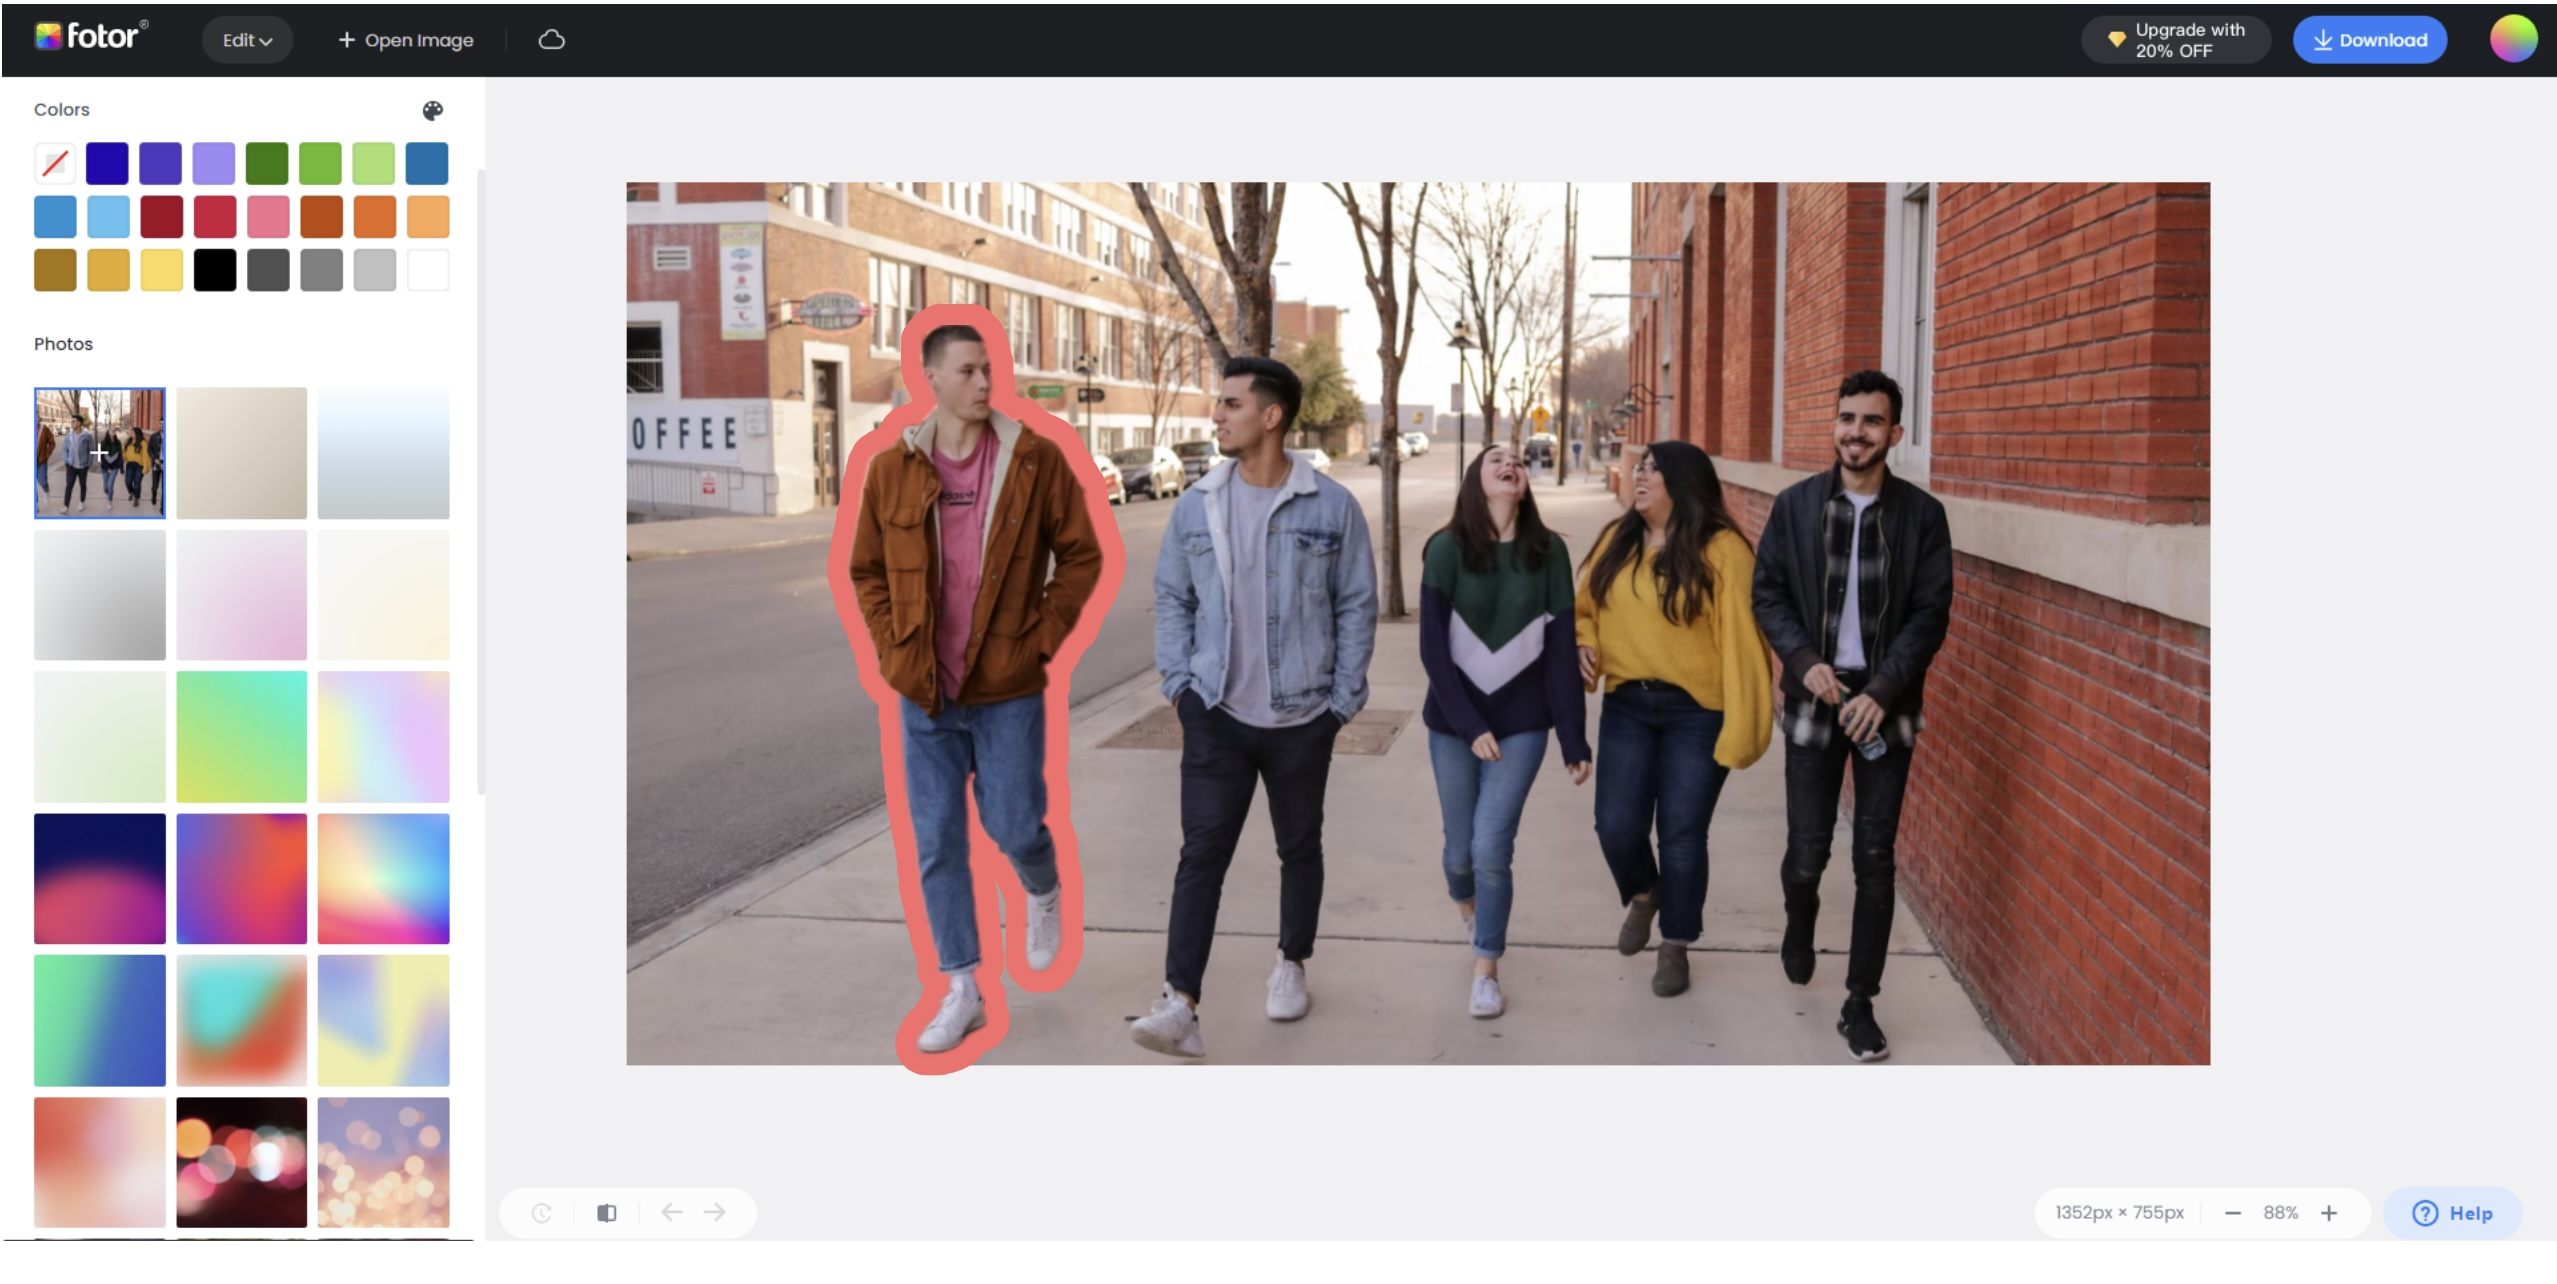 add a walking male into a group image where several friends are walking down the street